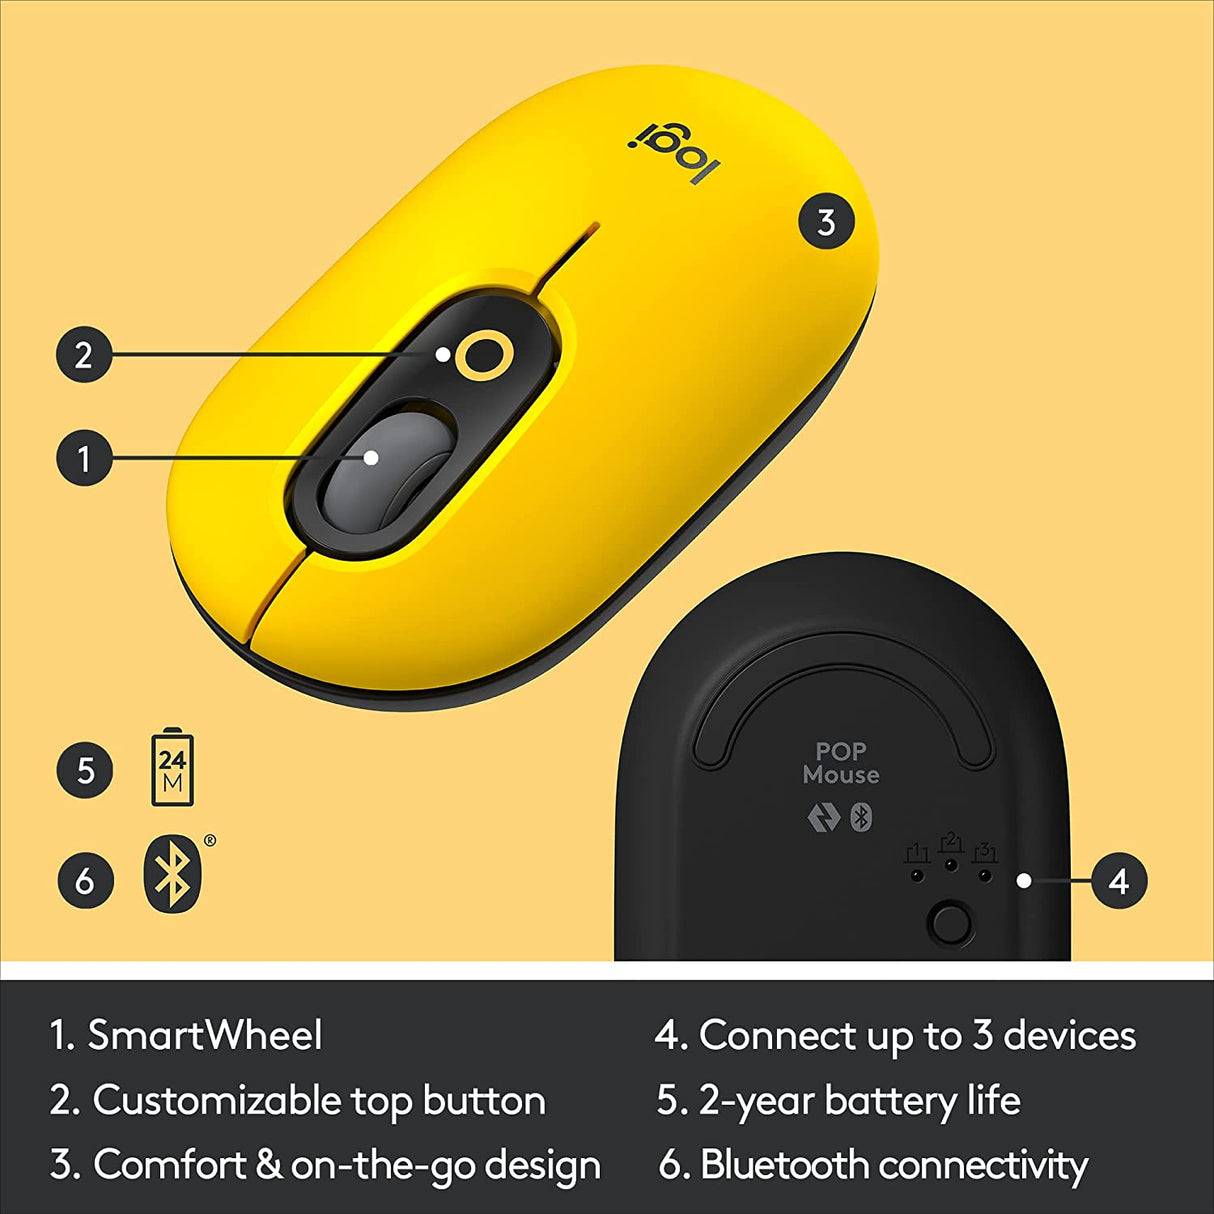  Logitech POP Mouse, Wireless Mouse with Customizable Emojis,  SilentTouch Technology, Precision/Speed Scroll, Compact Design, Bluetooth,  Multi-Device, OS Compatible - Heartbreaker Rose : Electronics